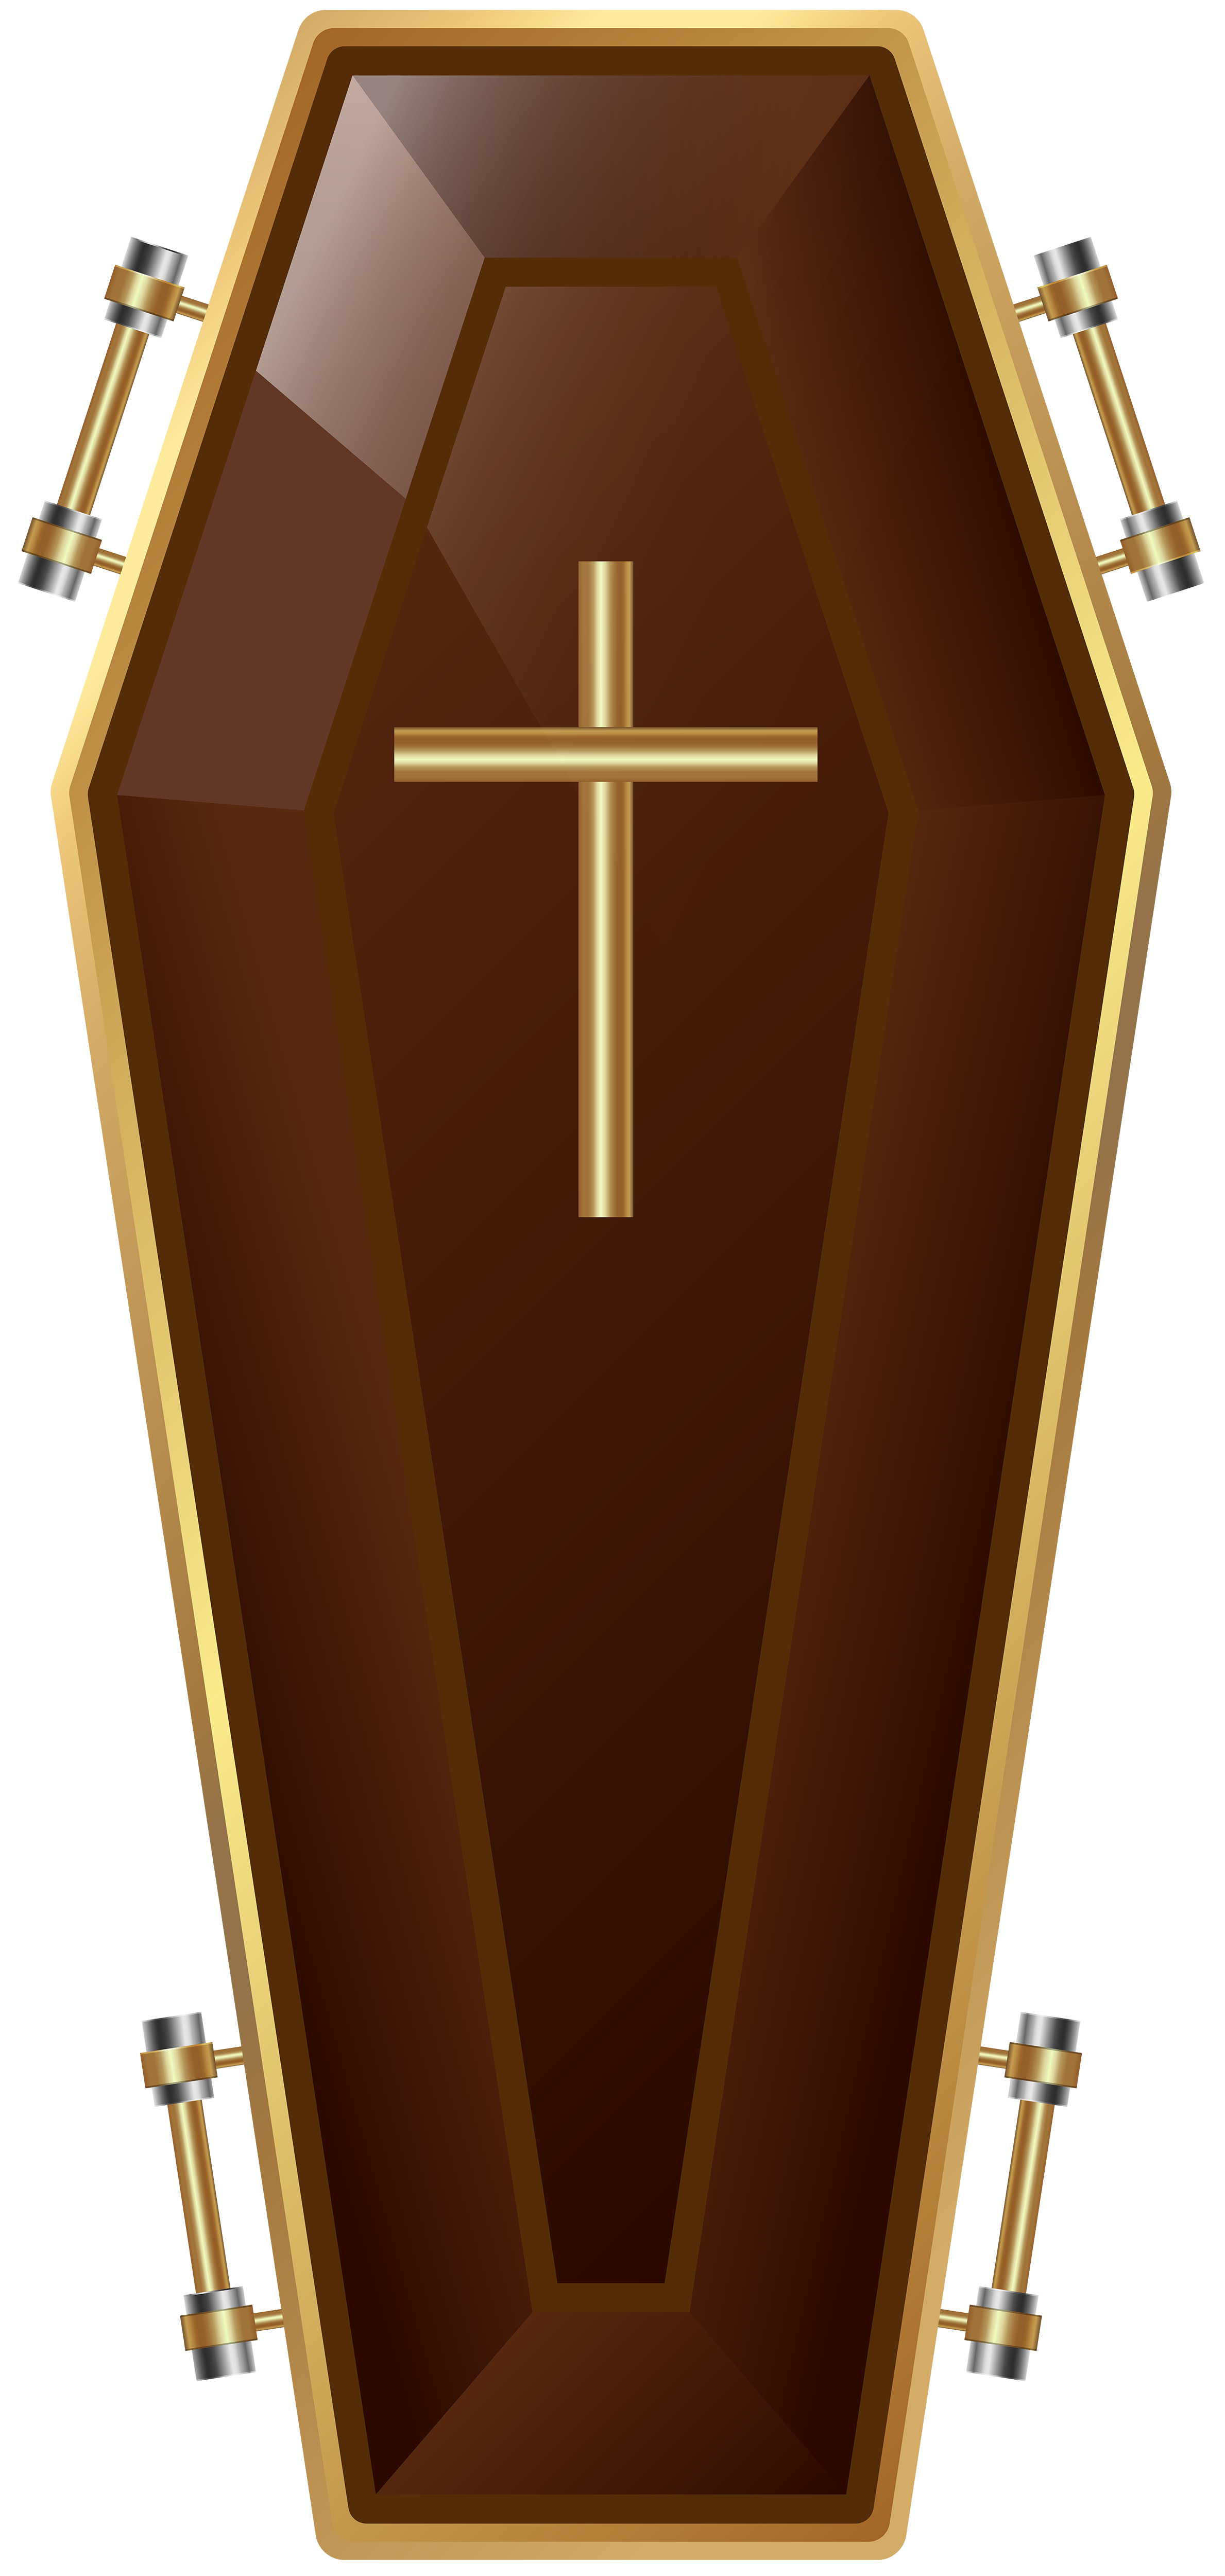 Wooden Coffin HD Image Free PNG Image